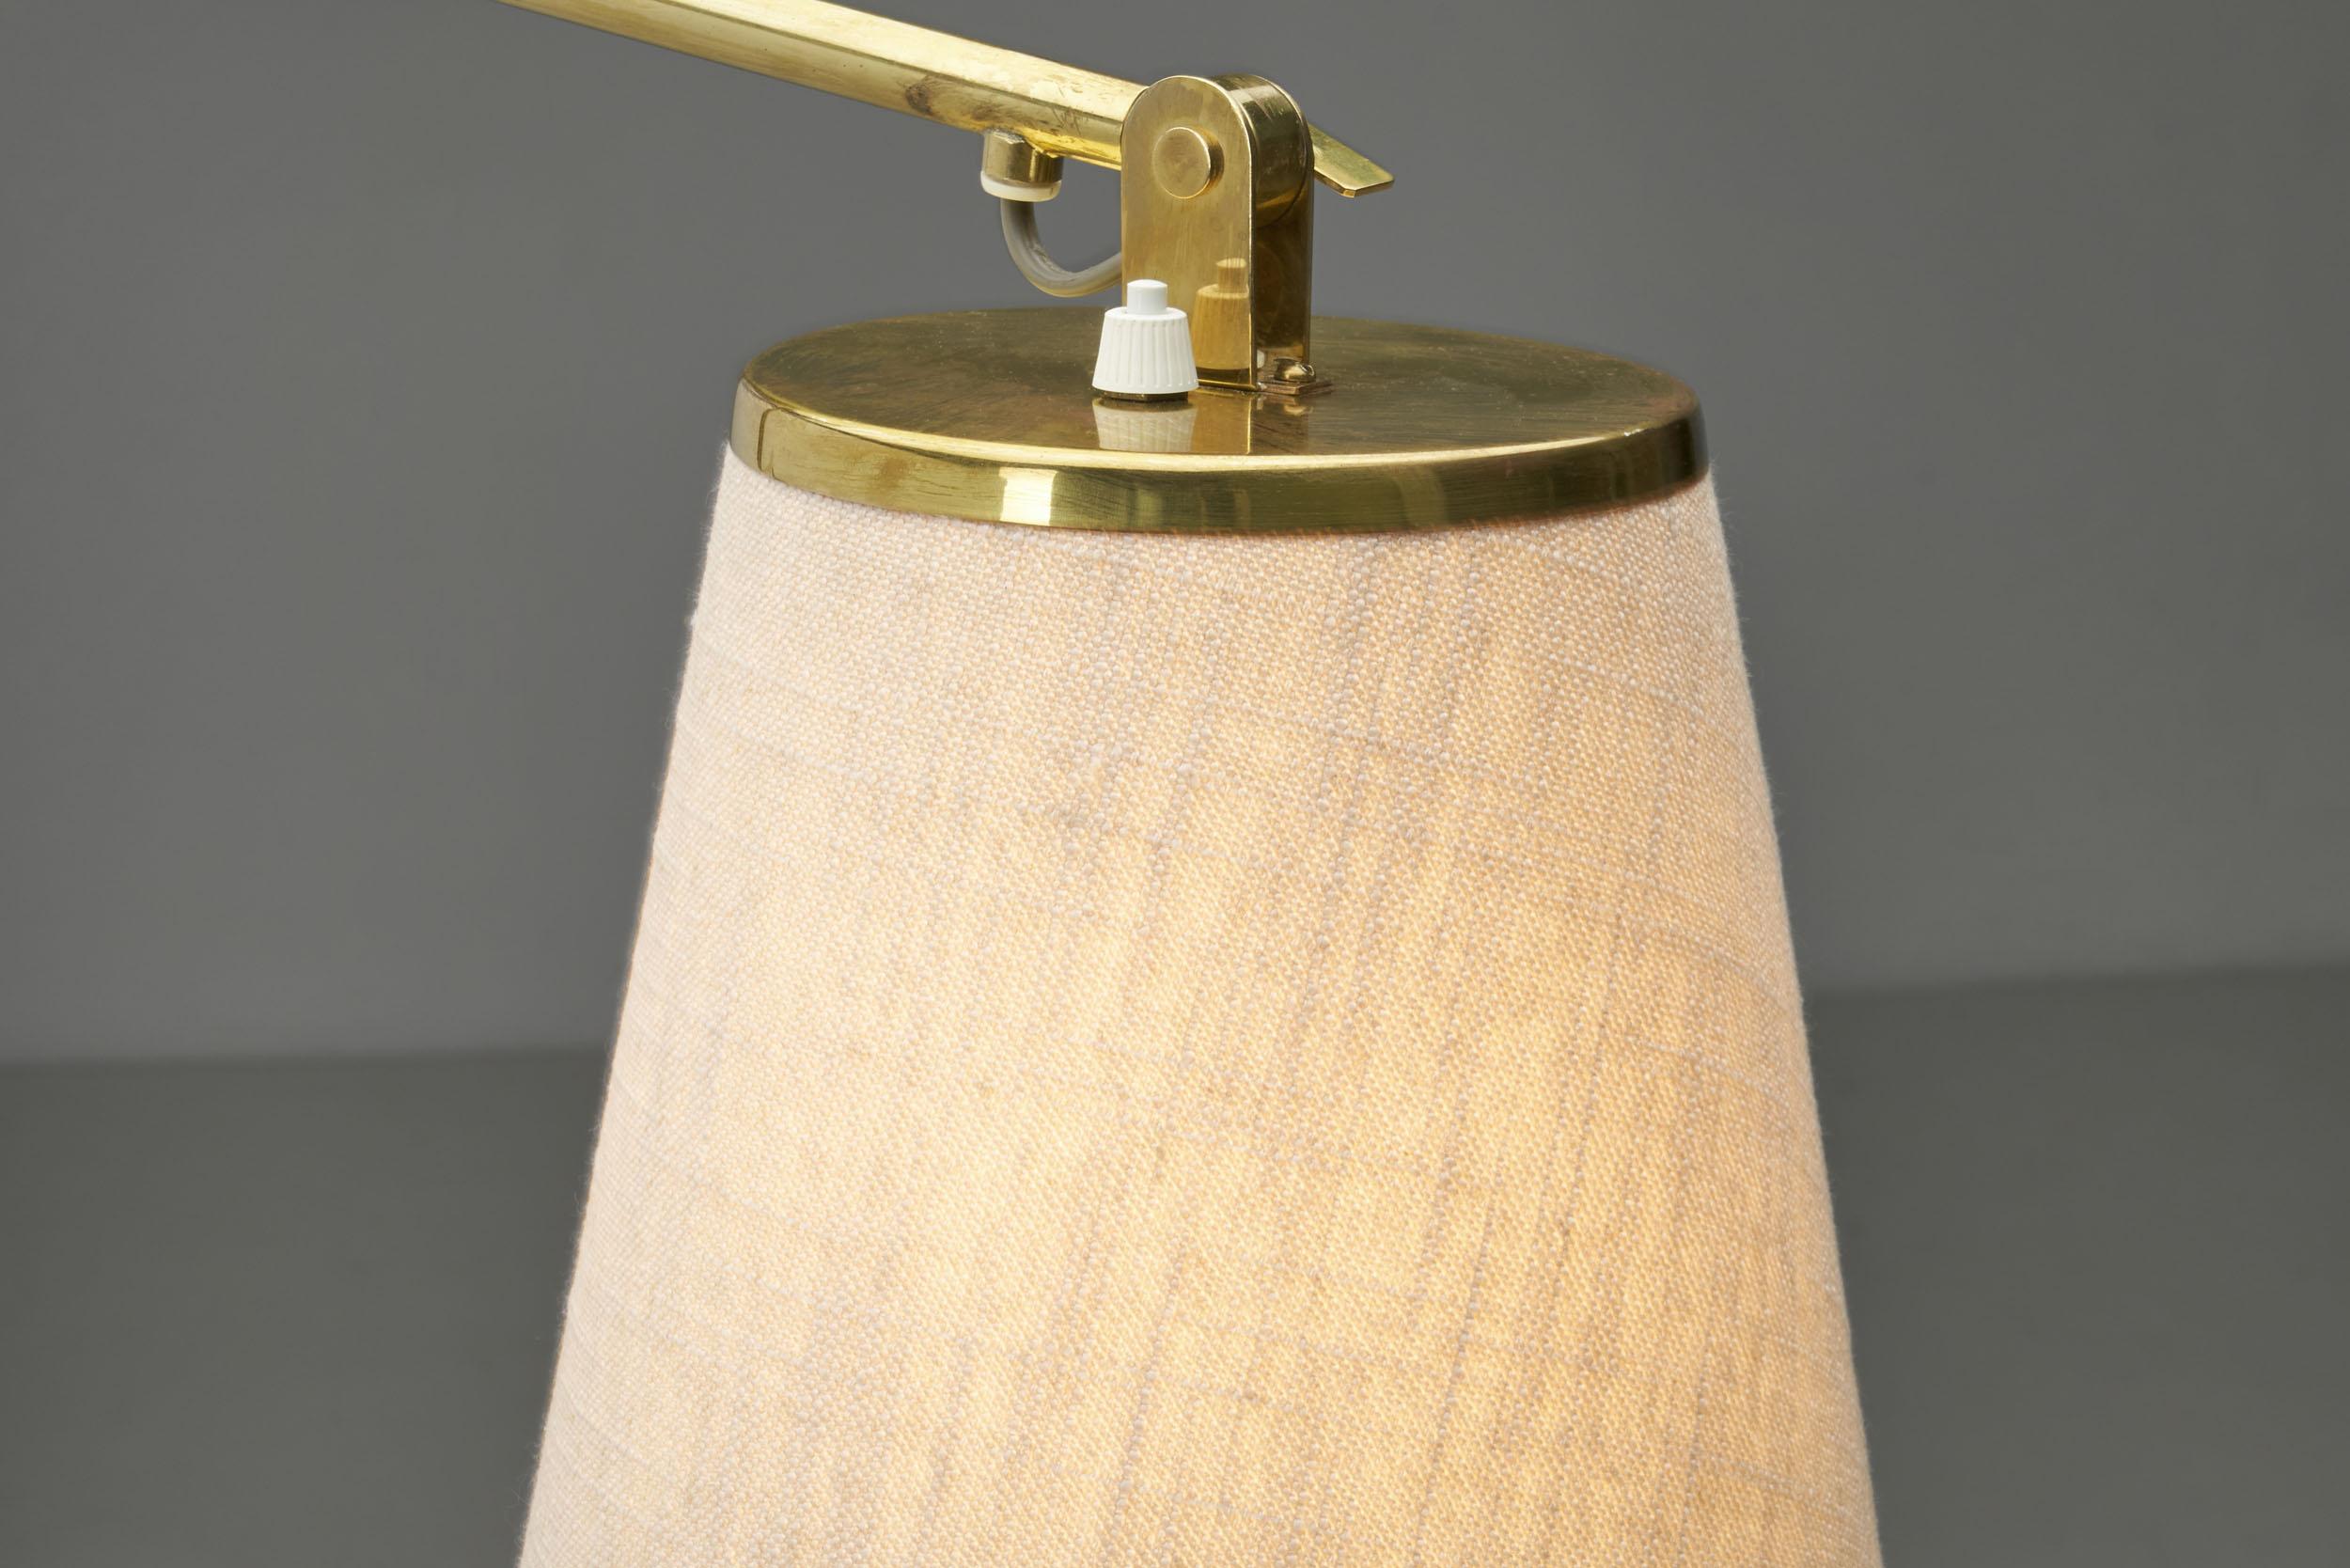 Mid-20th Century Paavo Tynell Model “9414” Brass Wall Light for Taito Oy, Finland, 1950s